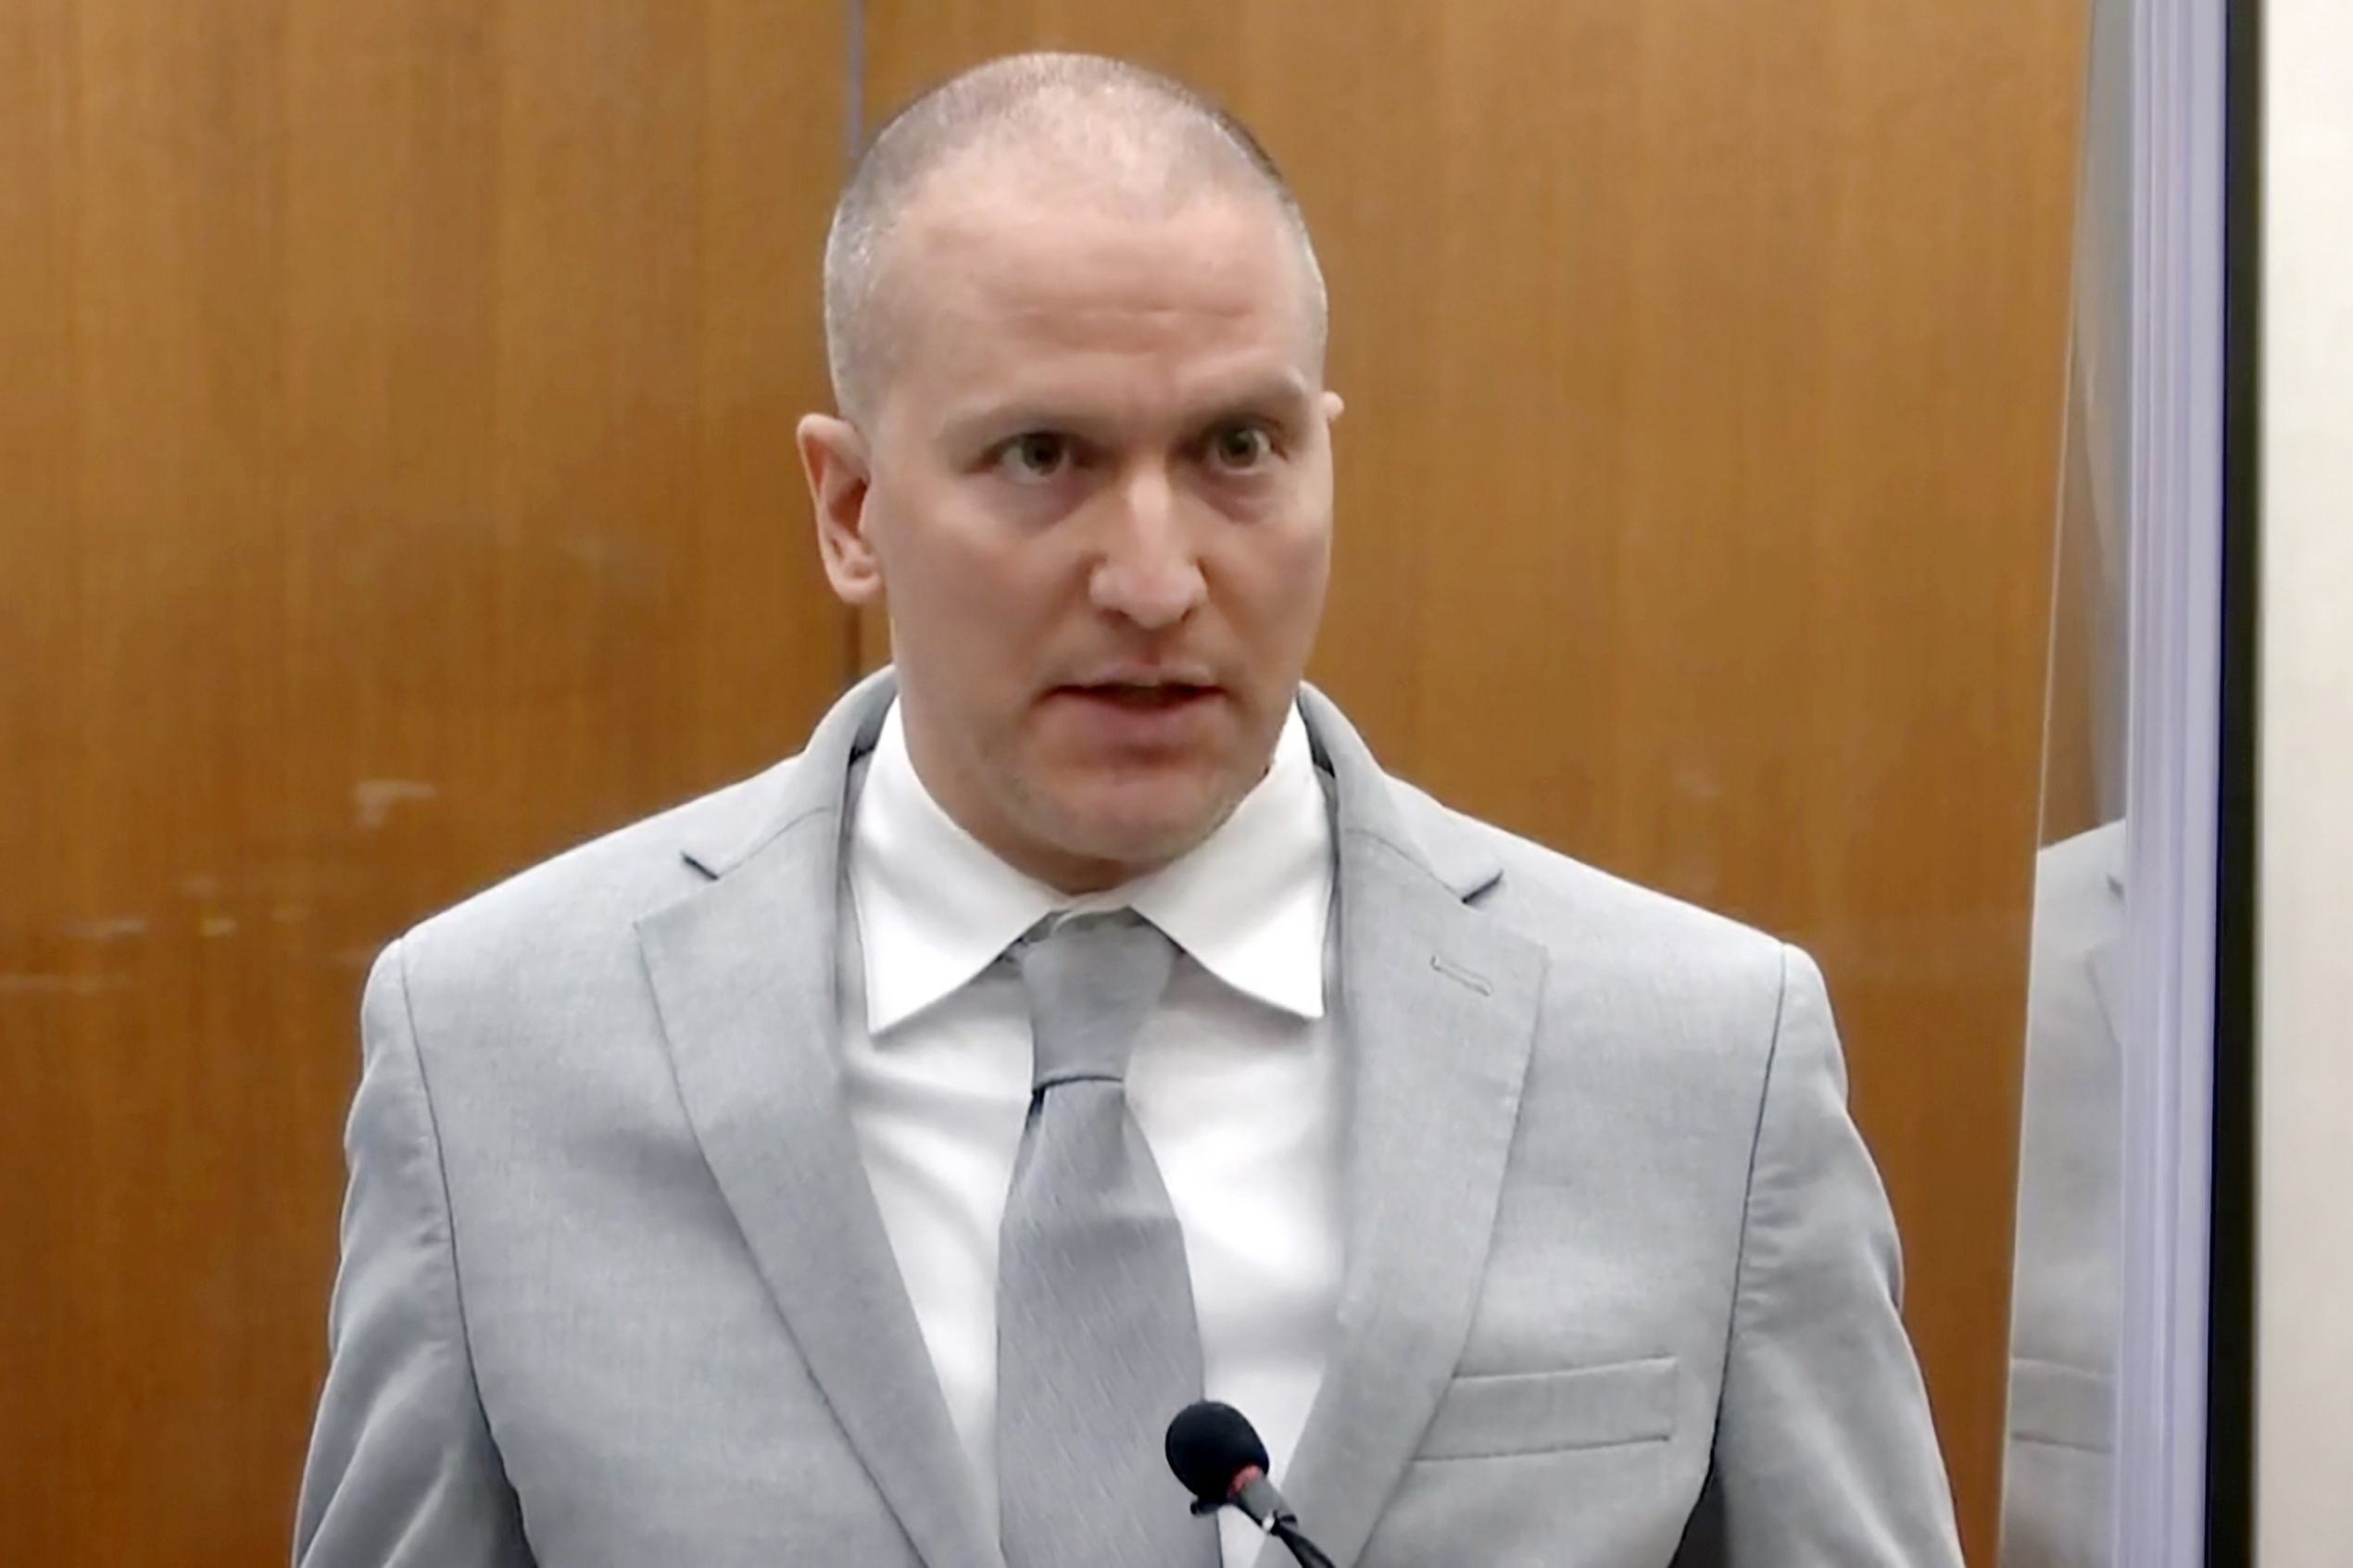 Former Minneapolis police Officer Derek Chauvin, convicted of murdering George Floyd in 2020, was stabbed by another inmate and seriously injured Friday at a federal prison in Arizona, a person familiar with the matter told The Associated Press.